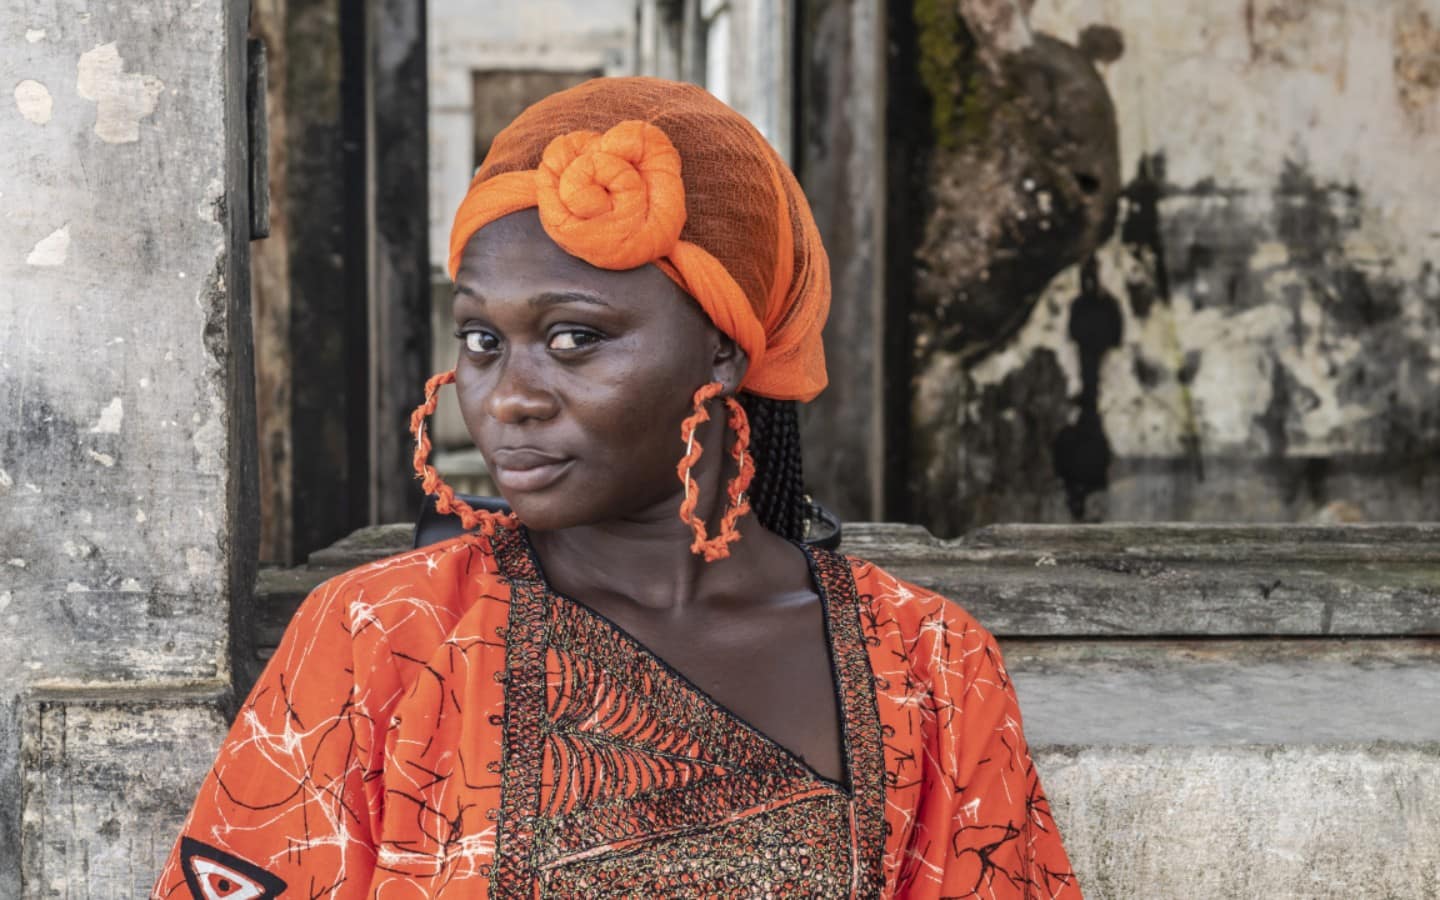 A Black Woman Poses For The Camera. She Is Wearing An Orange Dress With An Orange Headwrap And Orange Earrings.